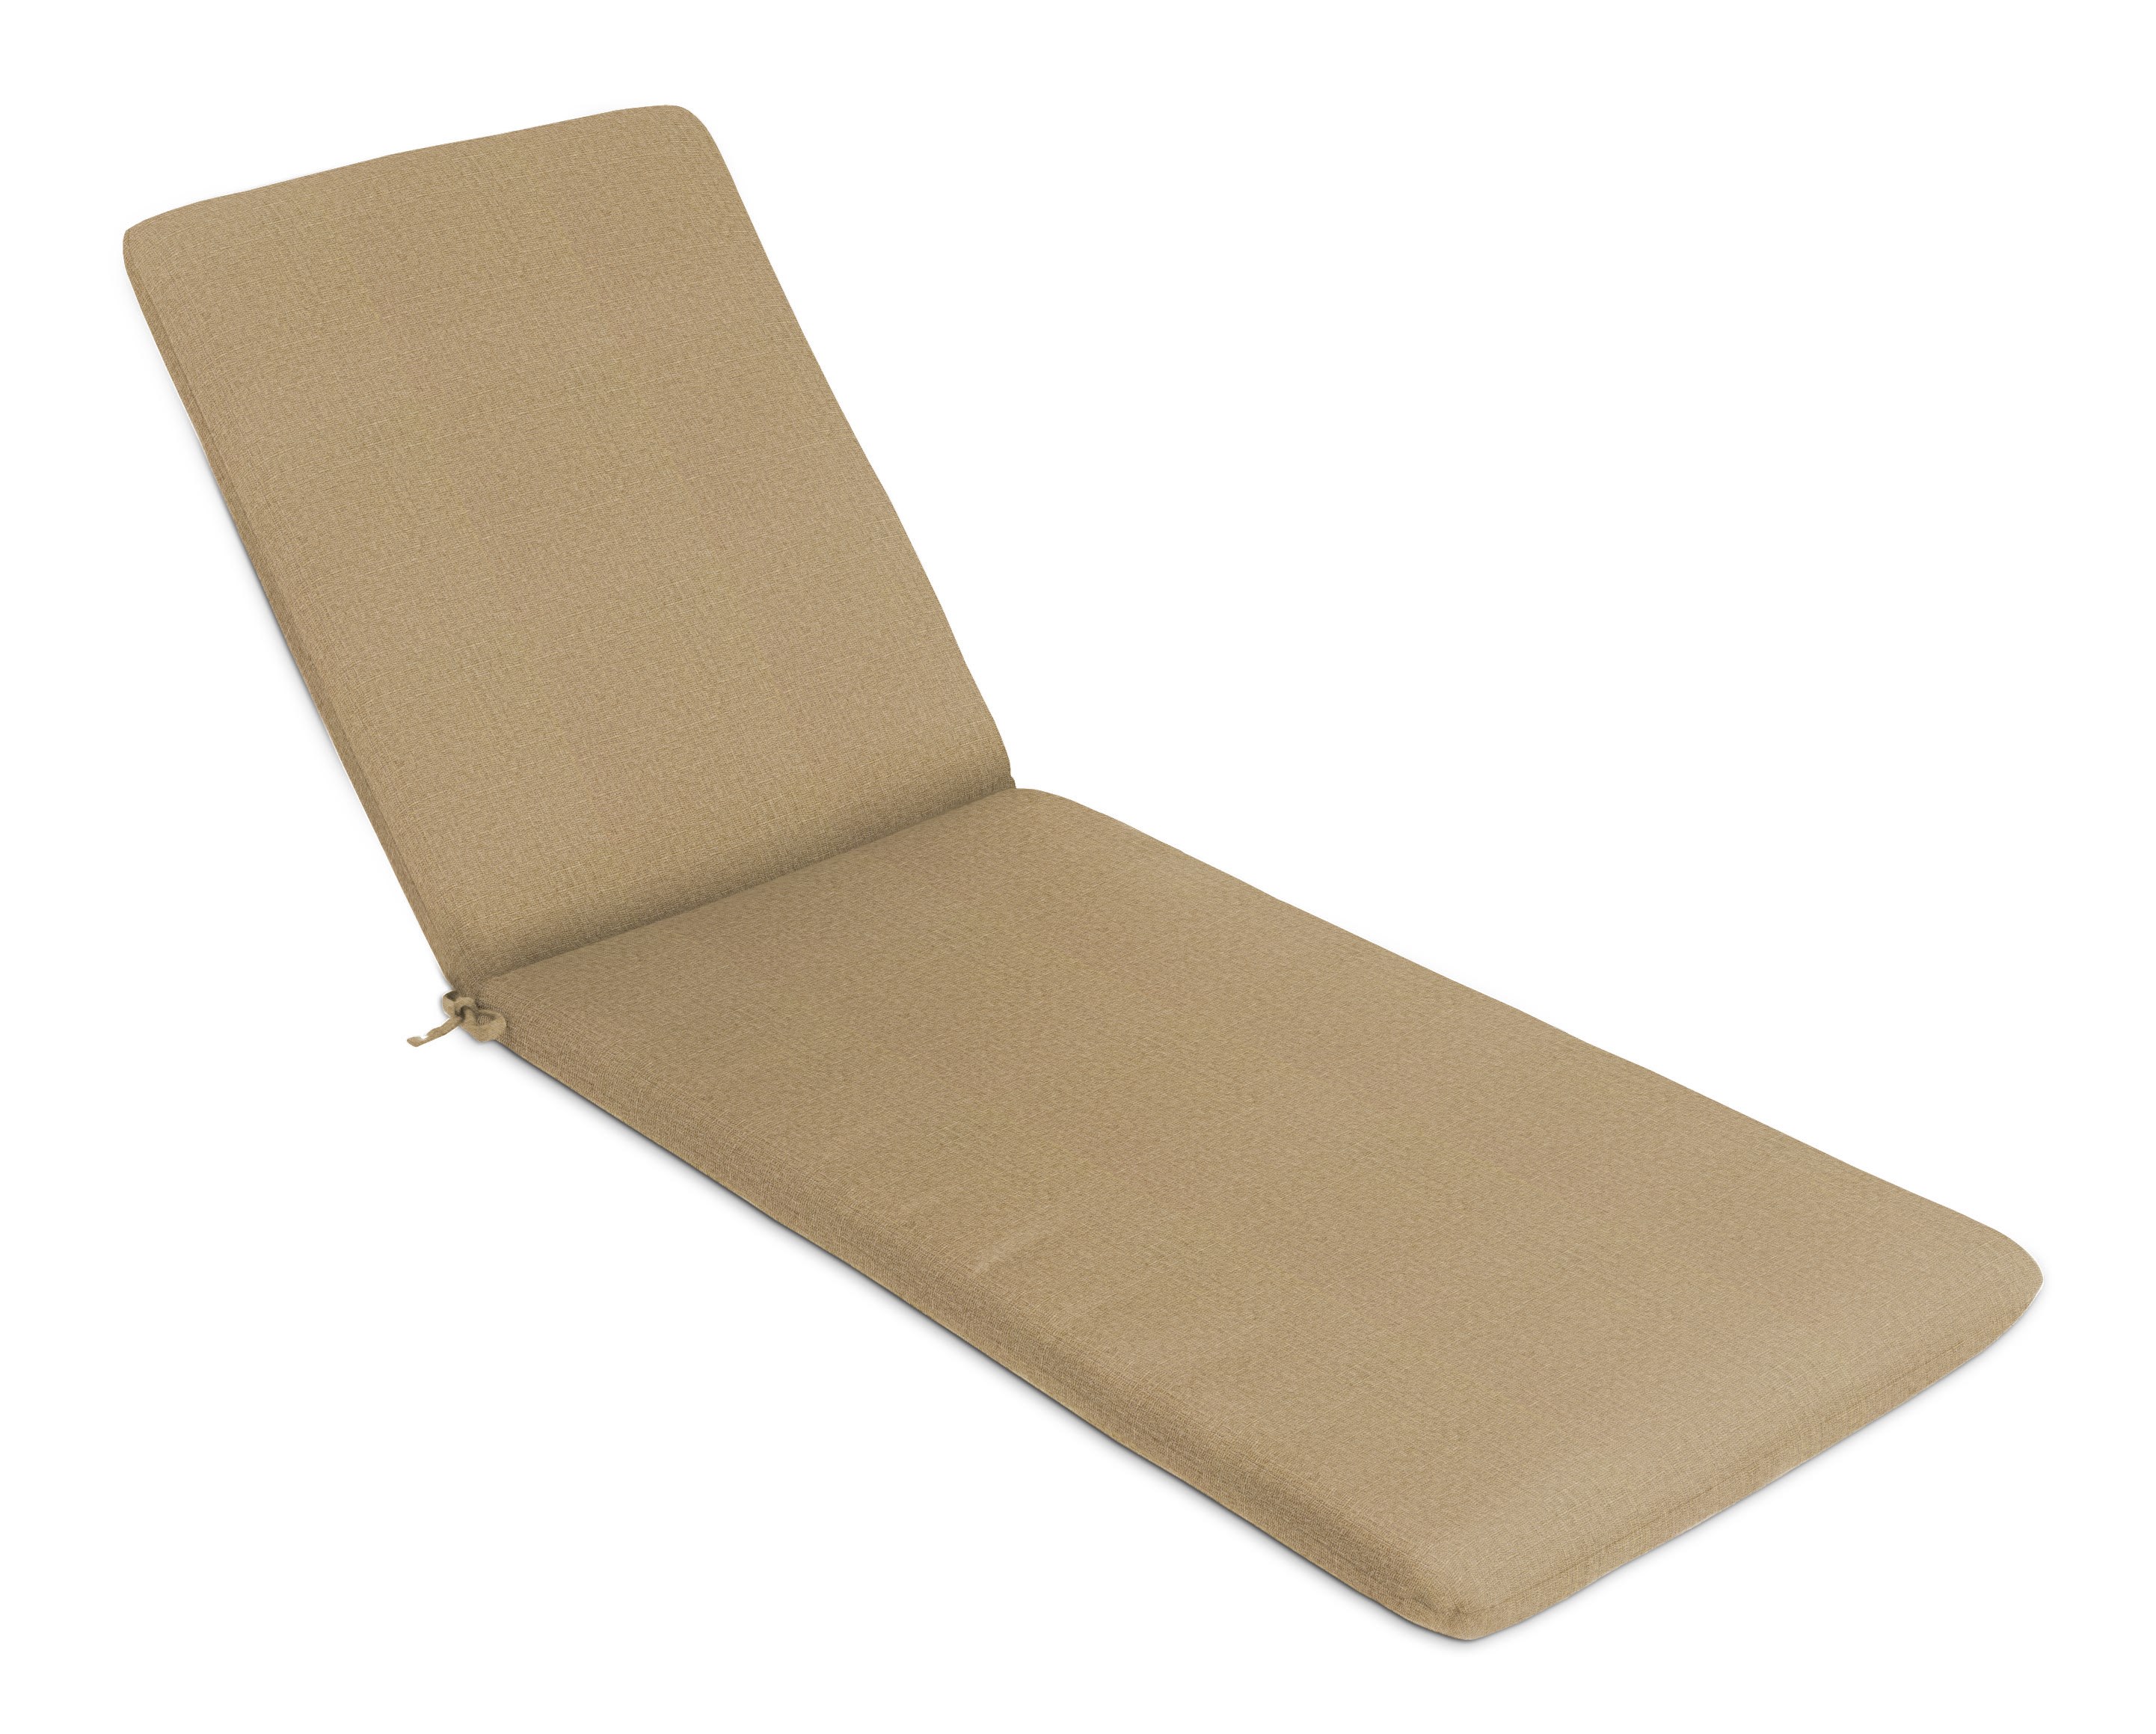 sesame linen thin chaise cushion product image